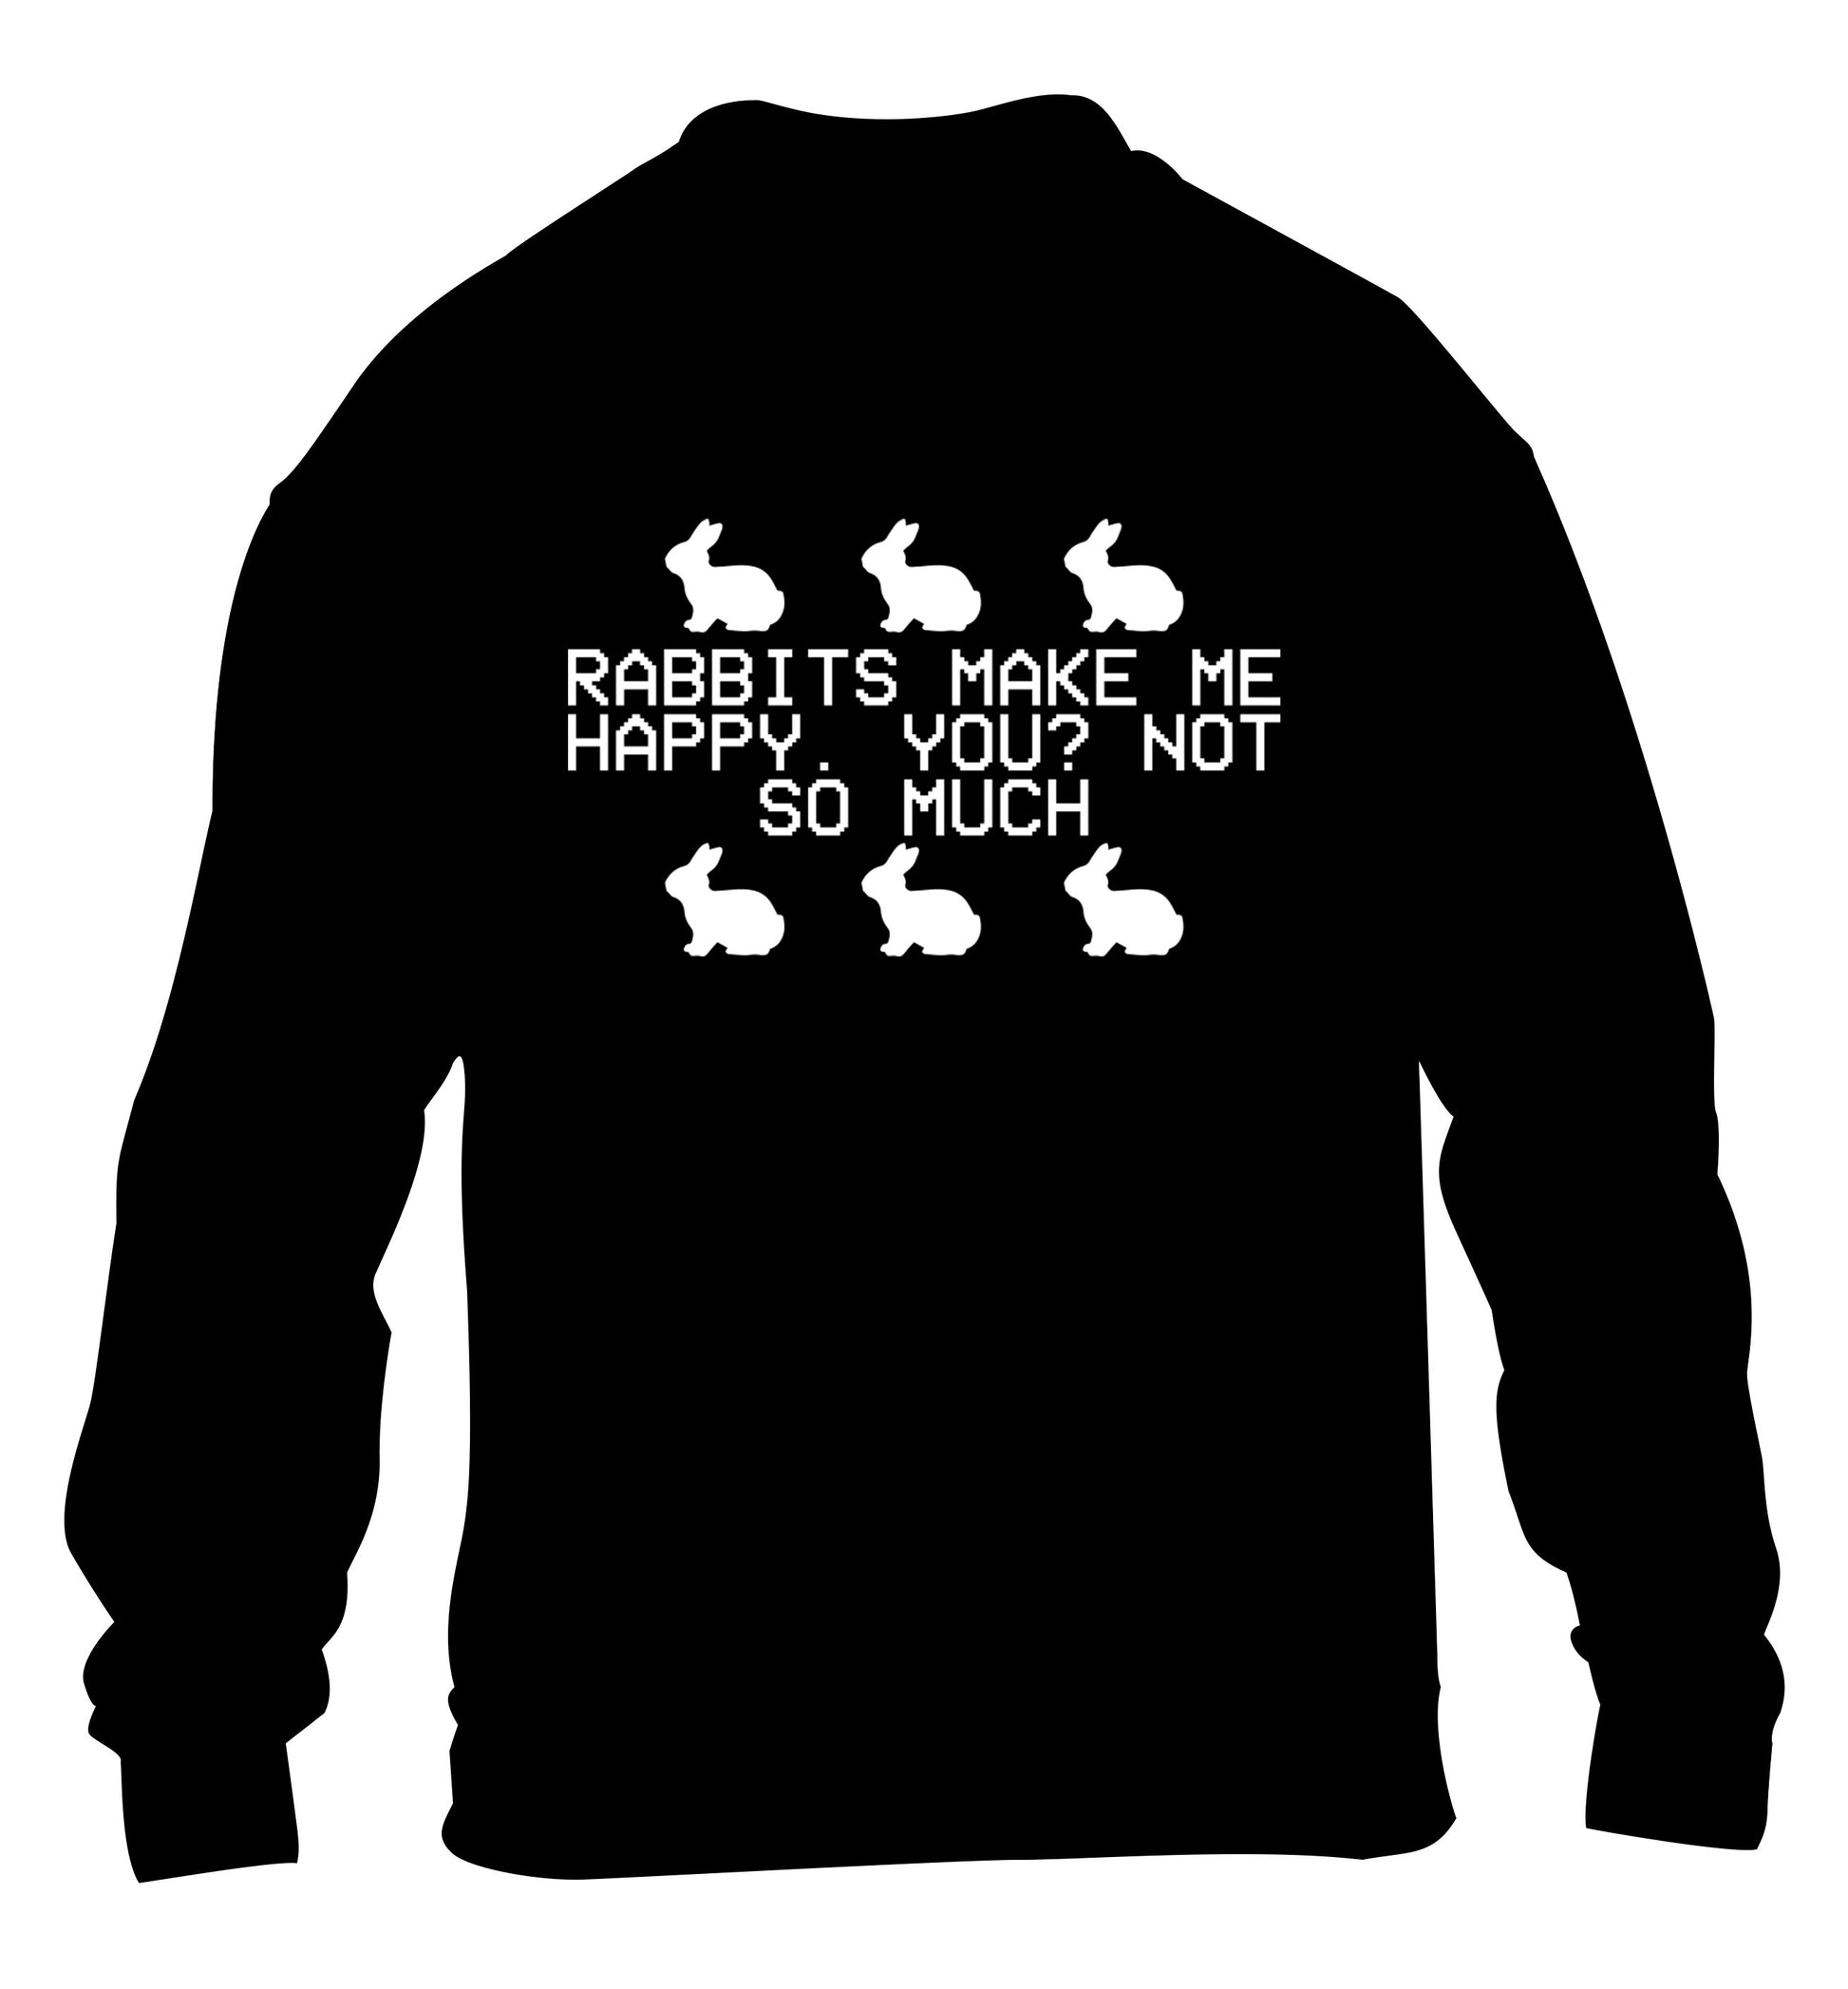 Rabbits make me happy, you not so much children's black  sweater 12-14 Years